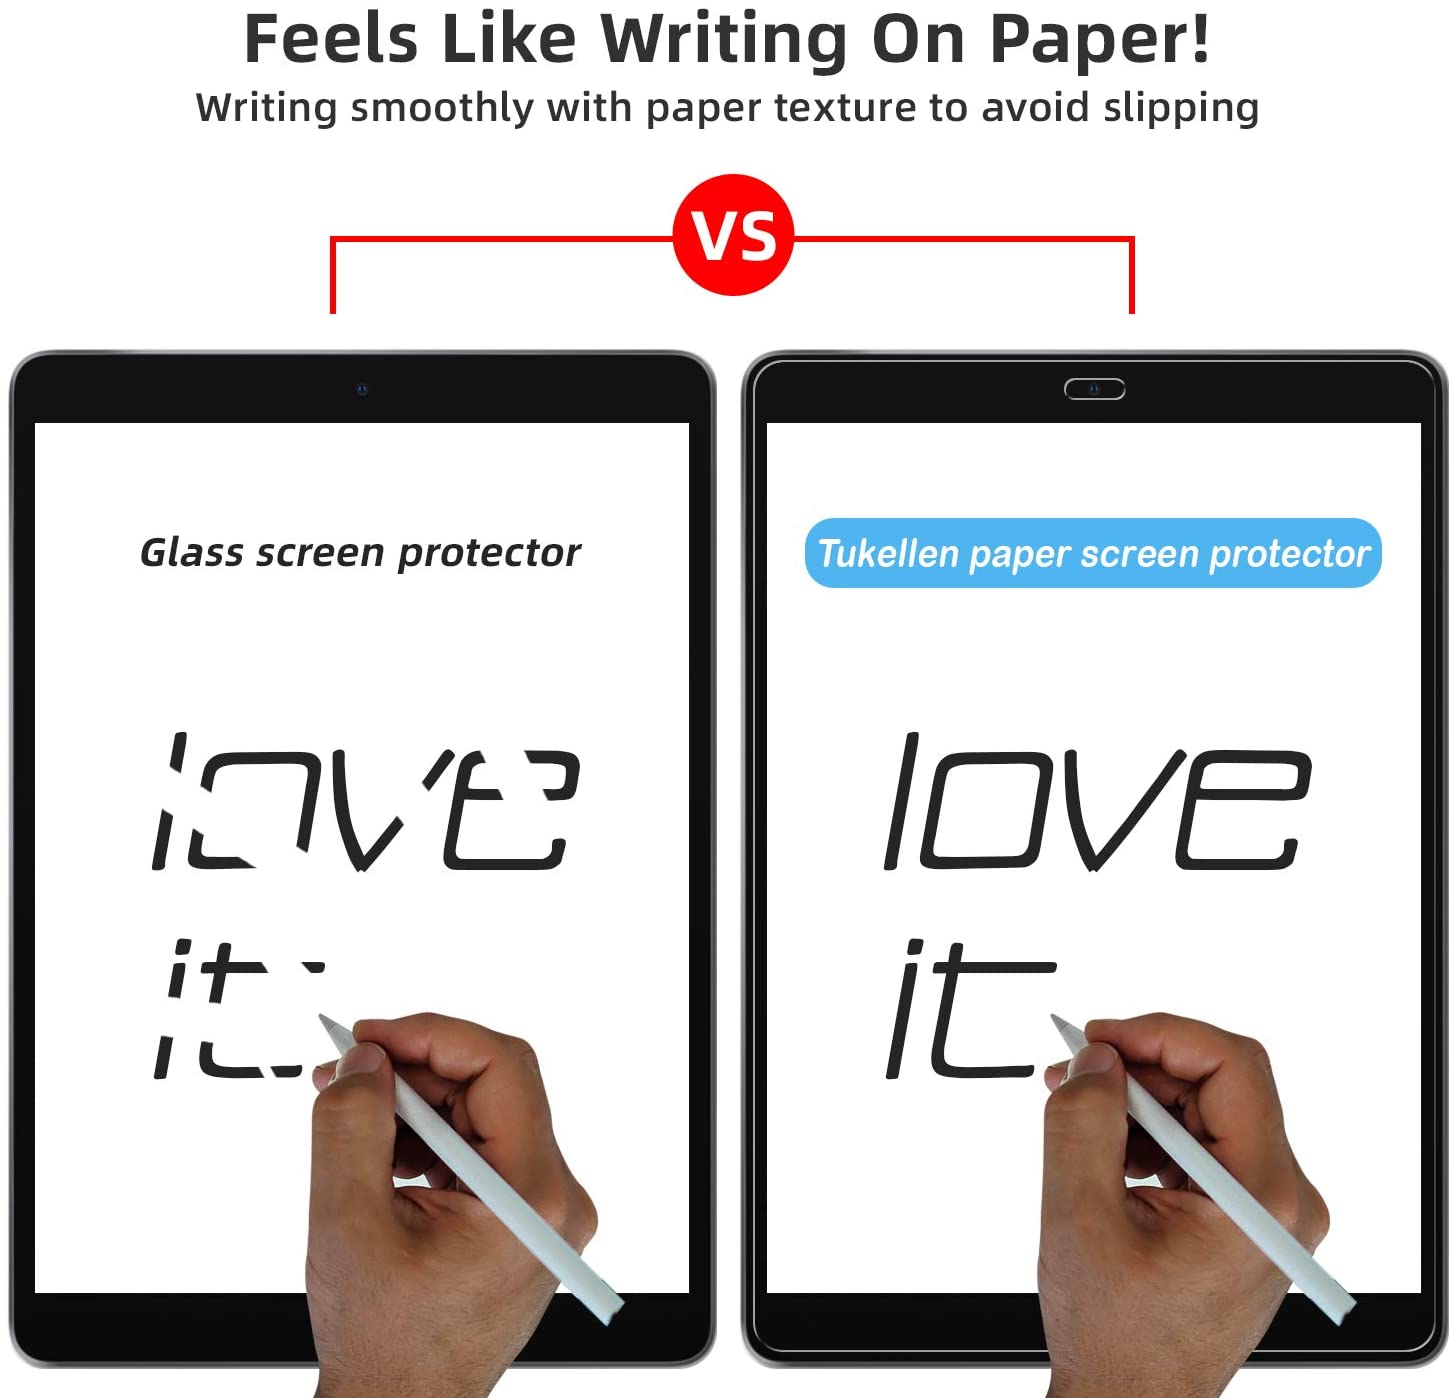 Like Paper Screen Protector for iPad 9.7 inch (iPad Pro 9.7 inch/iPad 5/6th Generation). - e4cents